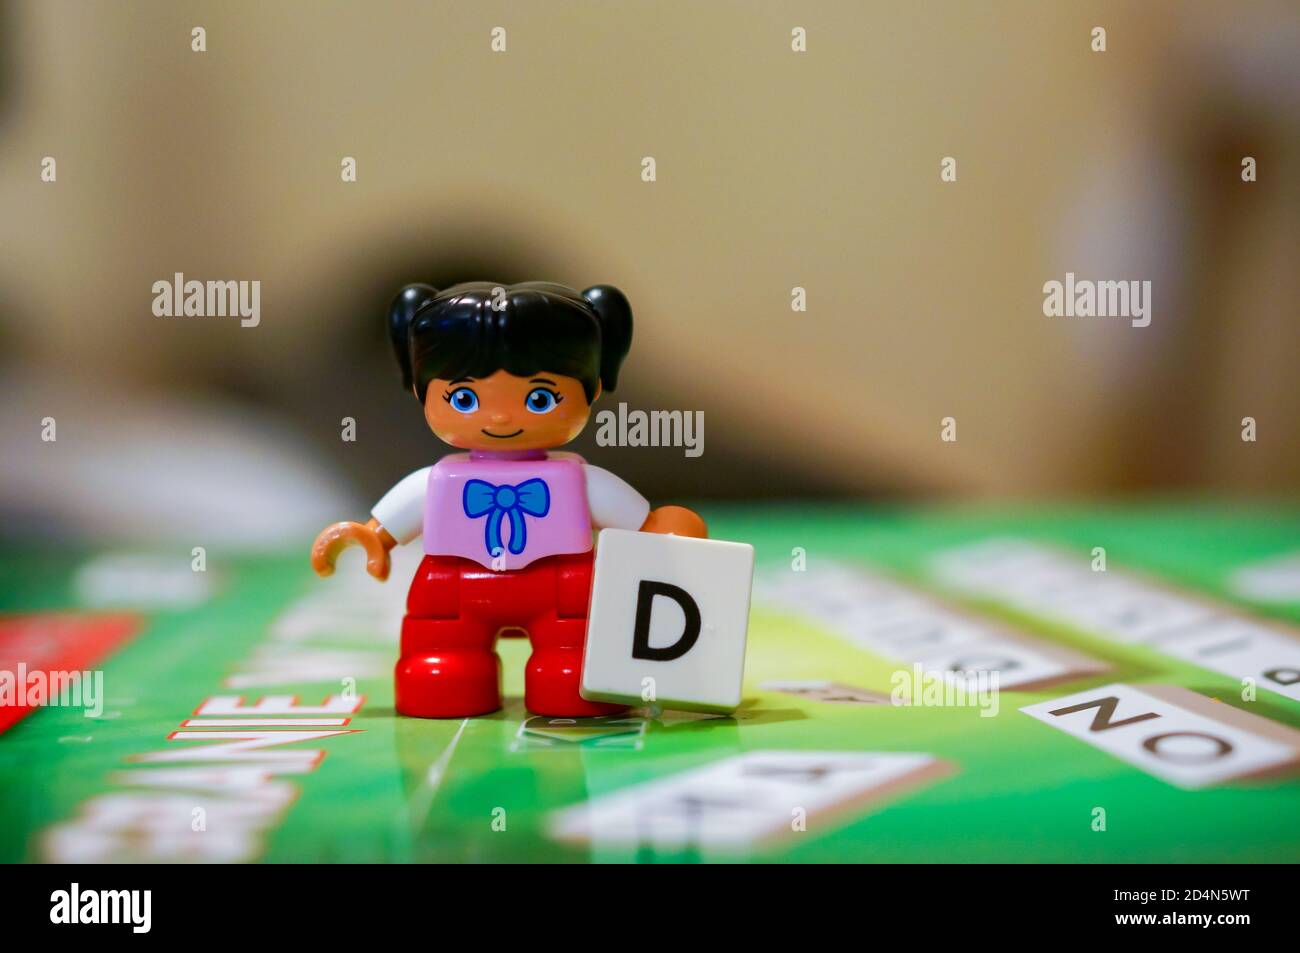 POZNAN, POLAND - Oct 06, 2020: Lego Duplo girl figurine holding a brick  with the letter D Stock Photo - Alamy